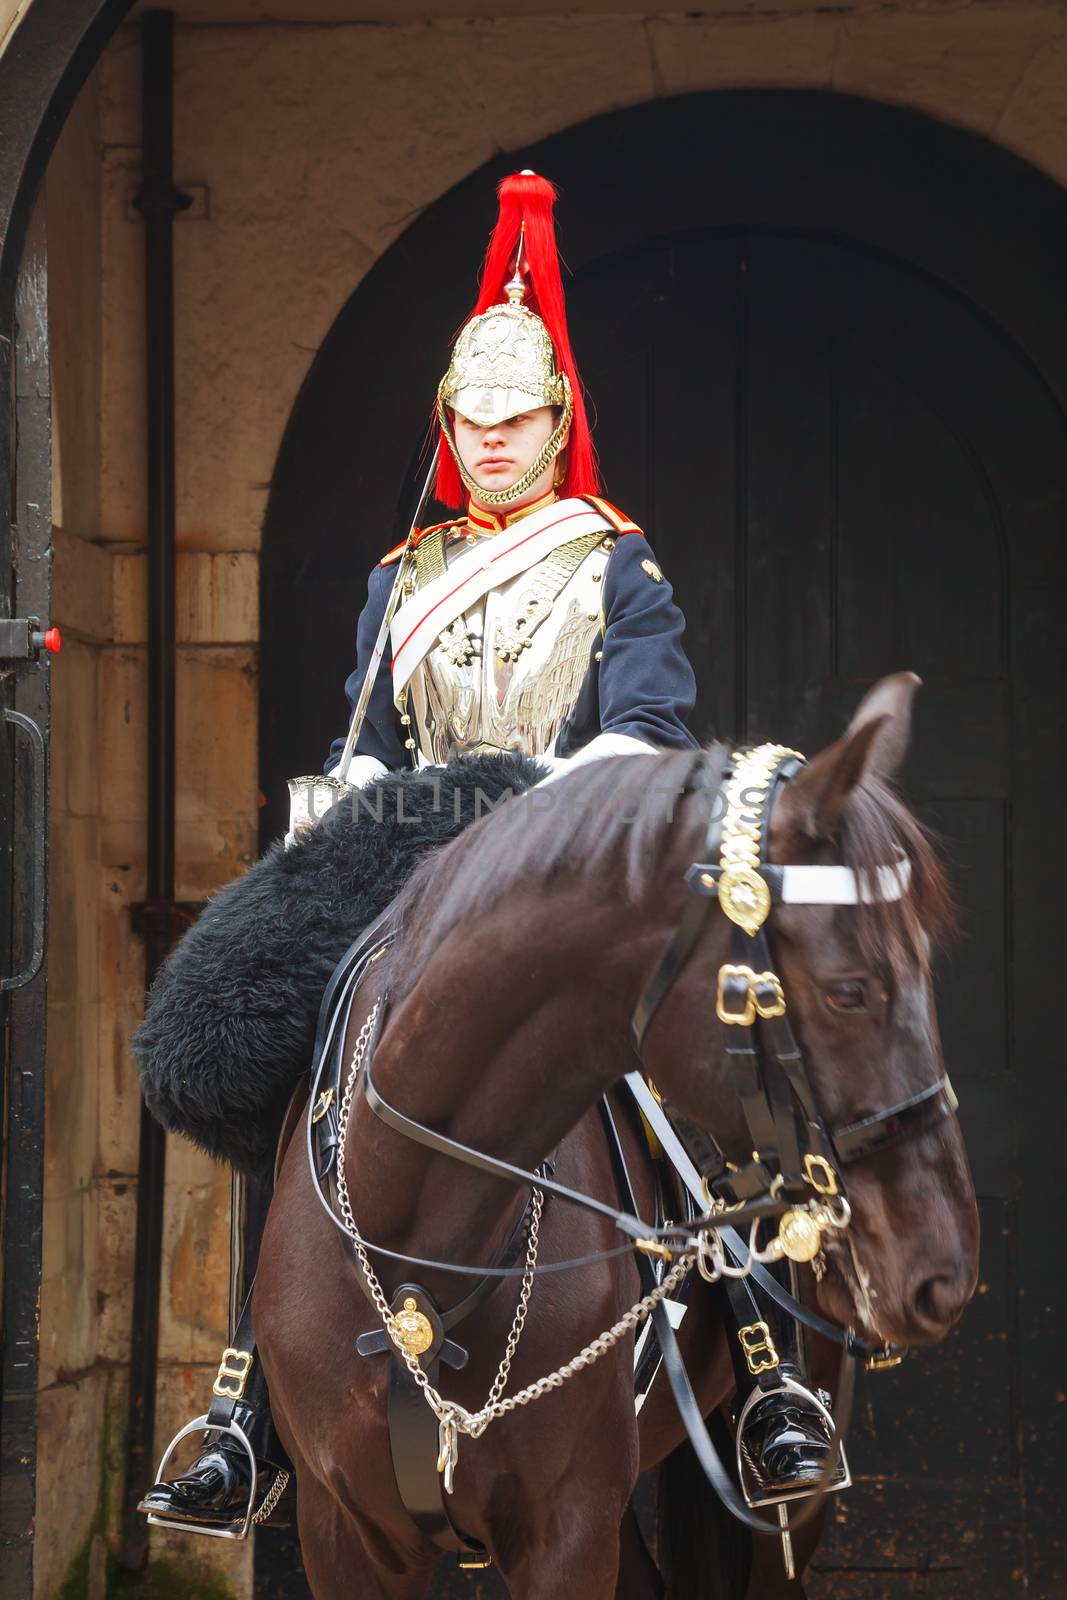 LONDON - APRIL 4: Life Guard of the Household Cavalry on April 4, 2015 in London, UK. The Household Cavalry is part of the Household Division and is the Queen's official bodyguard.